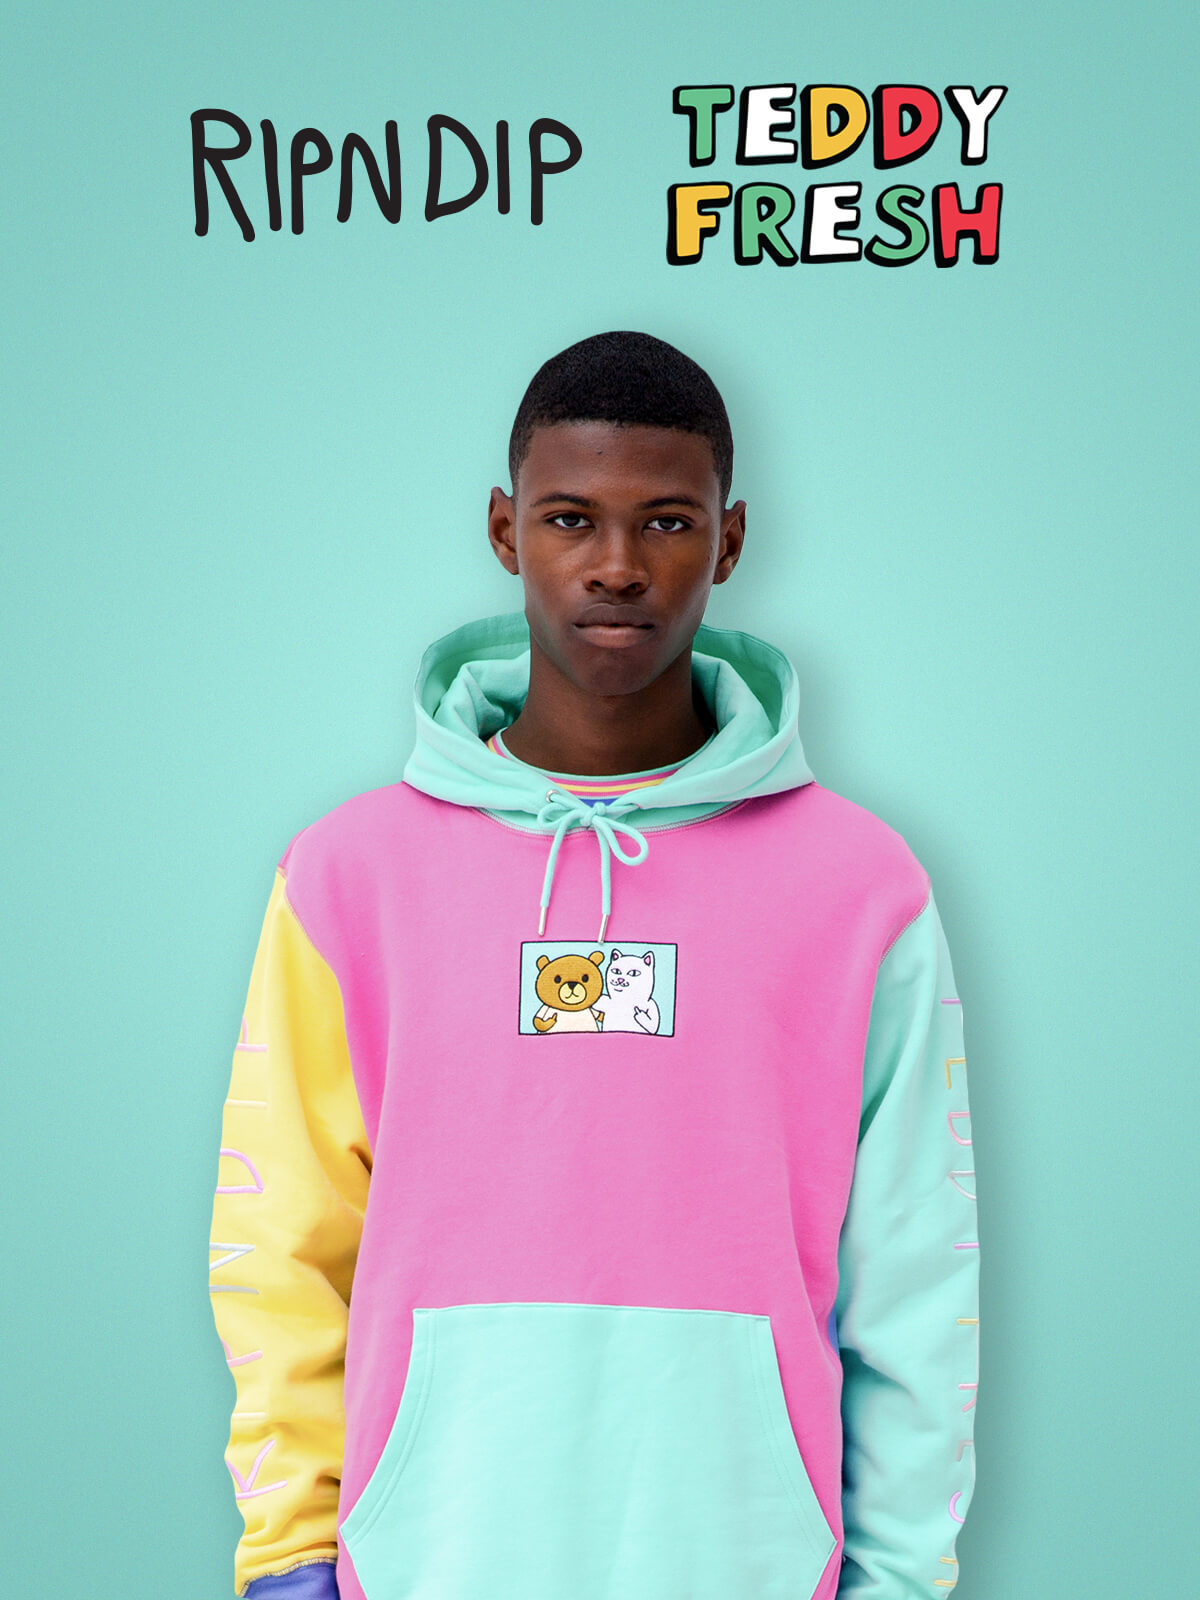 NEW ARRIVAL HOODIES FROM TEDDY FRESH AND MORE - SHOP HOODIES